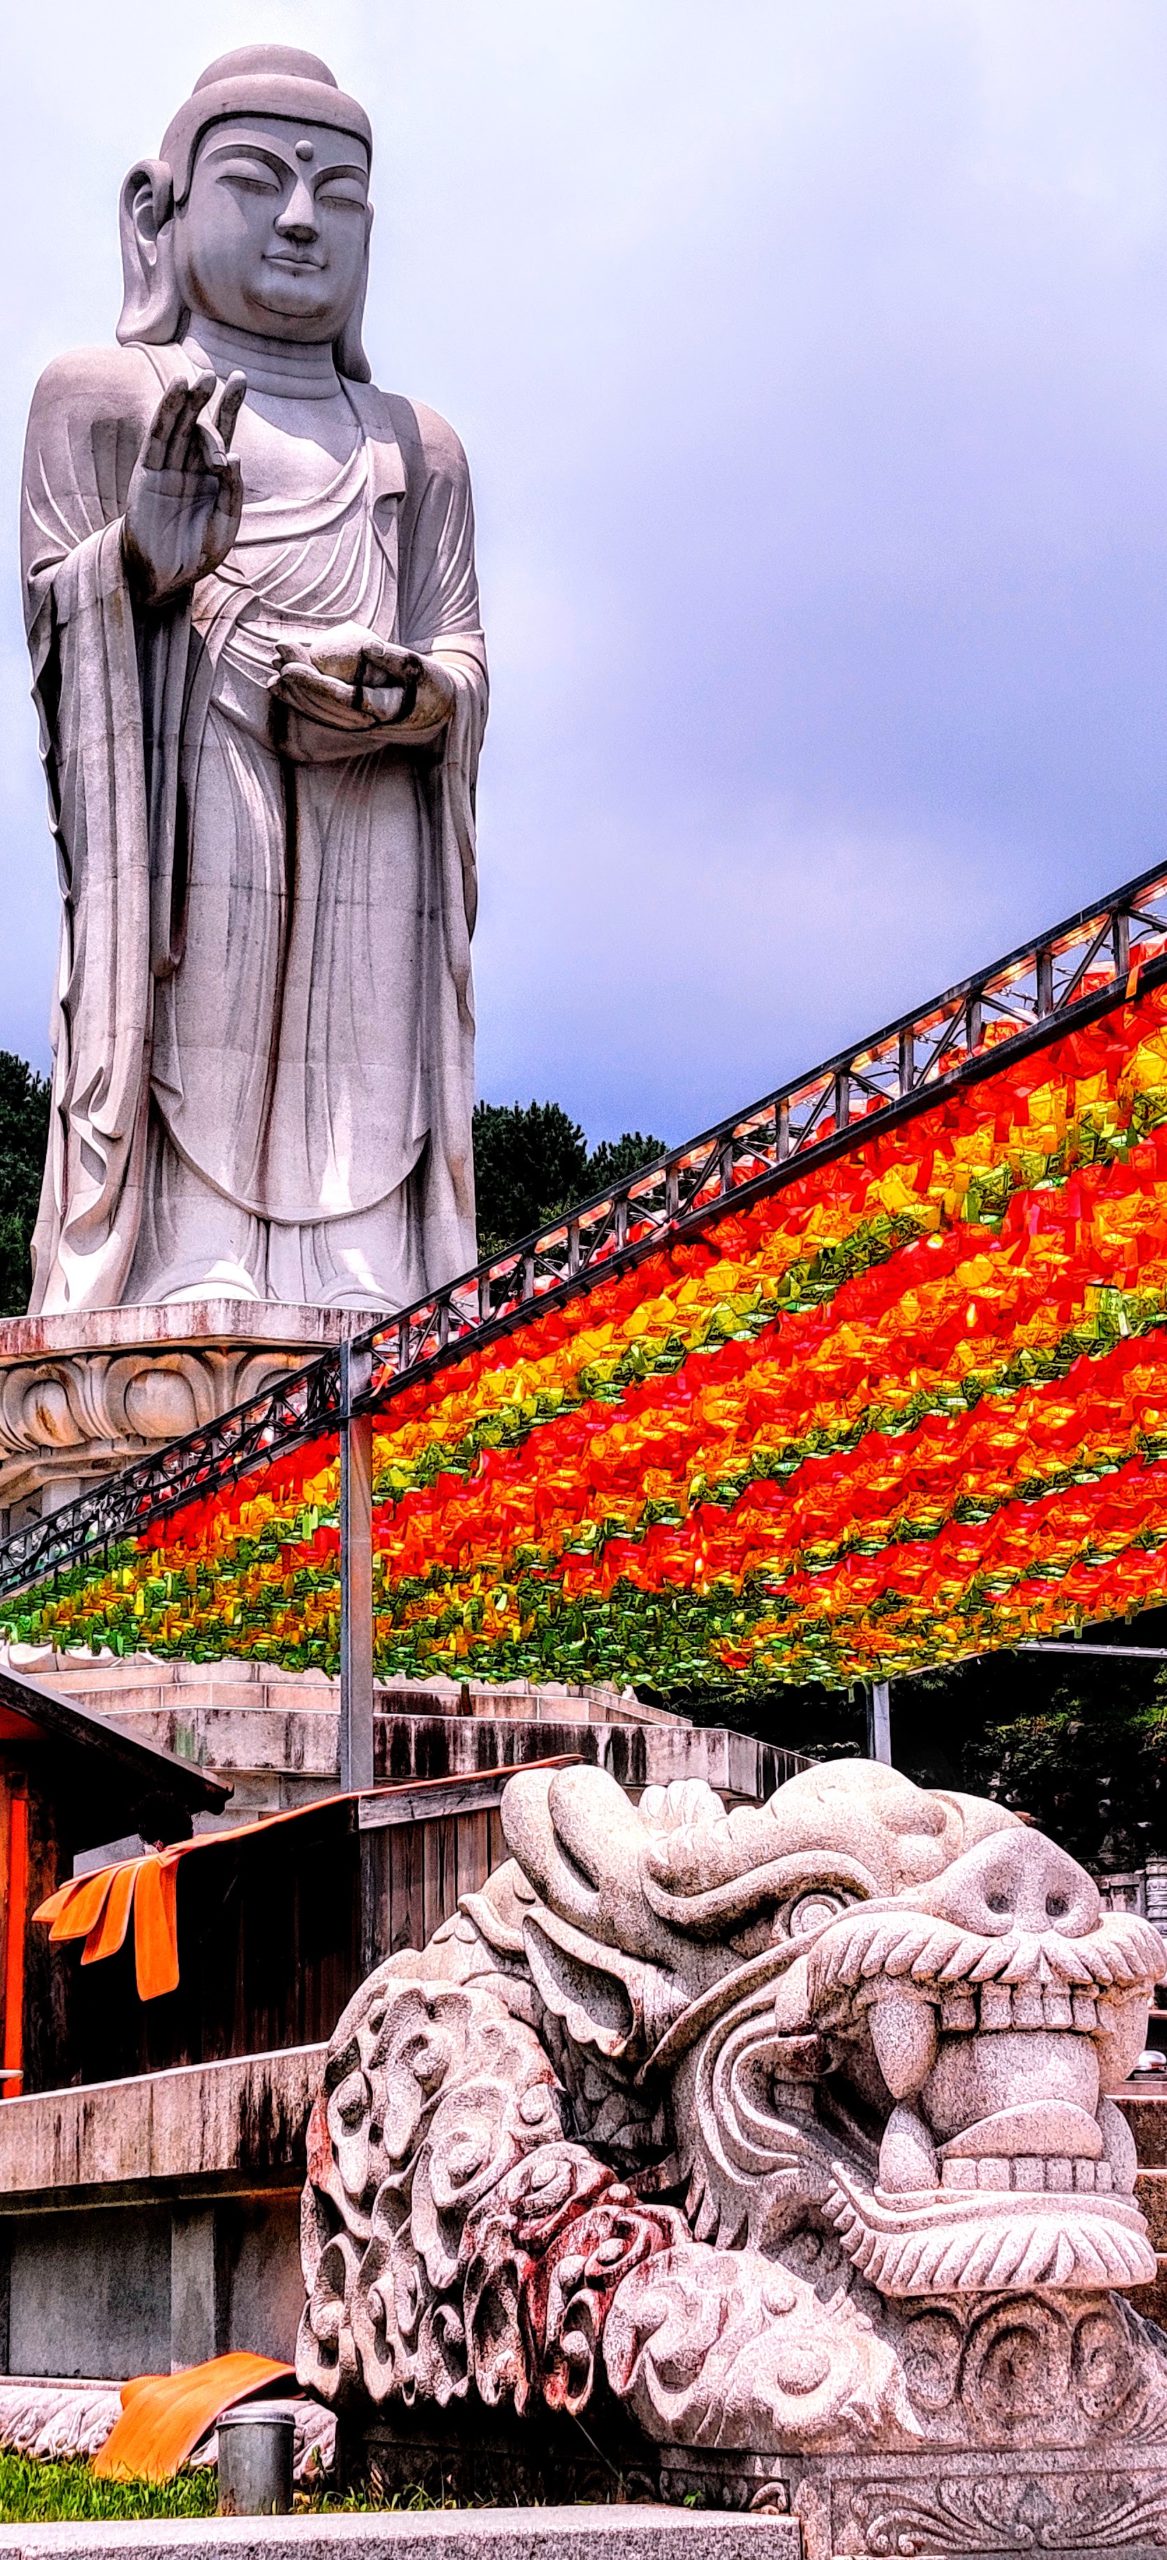 a larger-than-life buddha sculpture in south korea with a stone lion and many red and orange lanterns Donghwasa Daegu